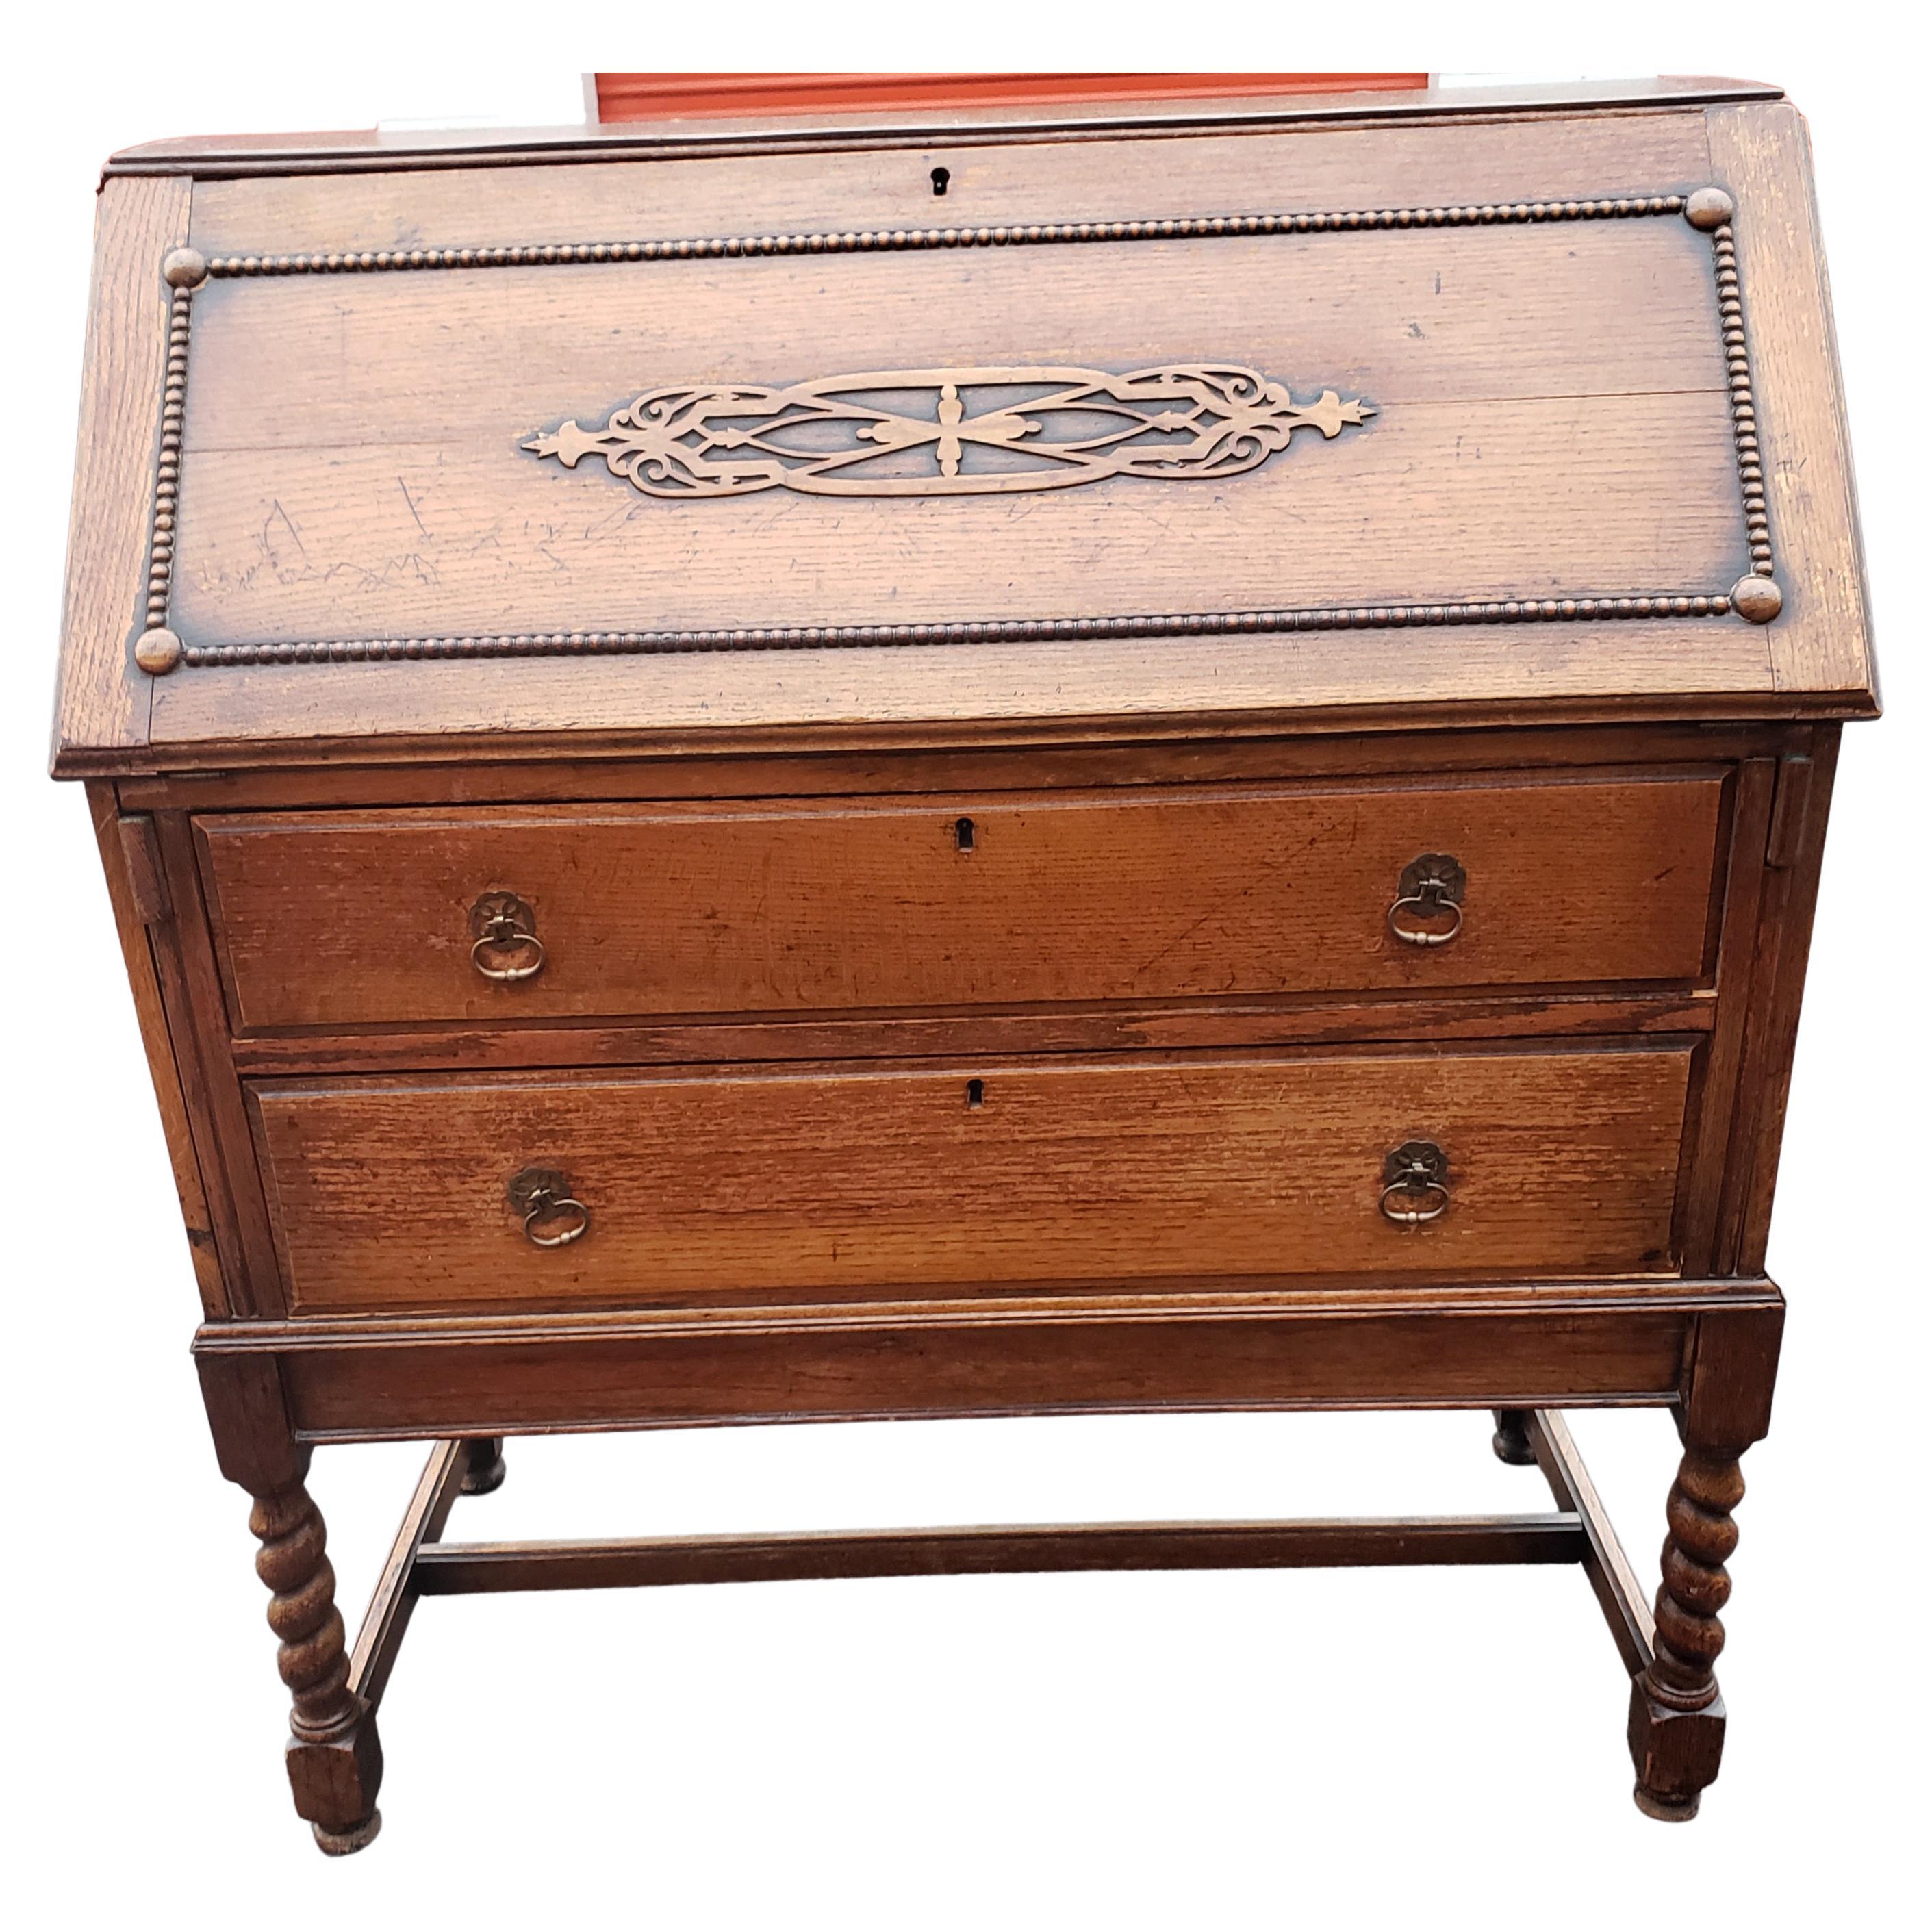 Antique barley twist jacobean desk secretary drop front oak bureau. 
You will love this handsome oak desk with the barley twist details. This piece says character and Old World Charm. It is in great condition and is ready to place in your home. It